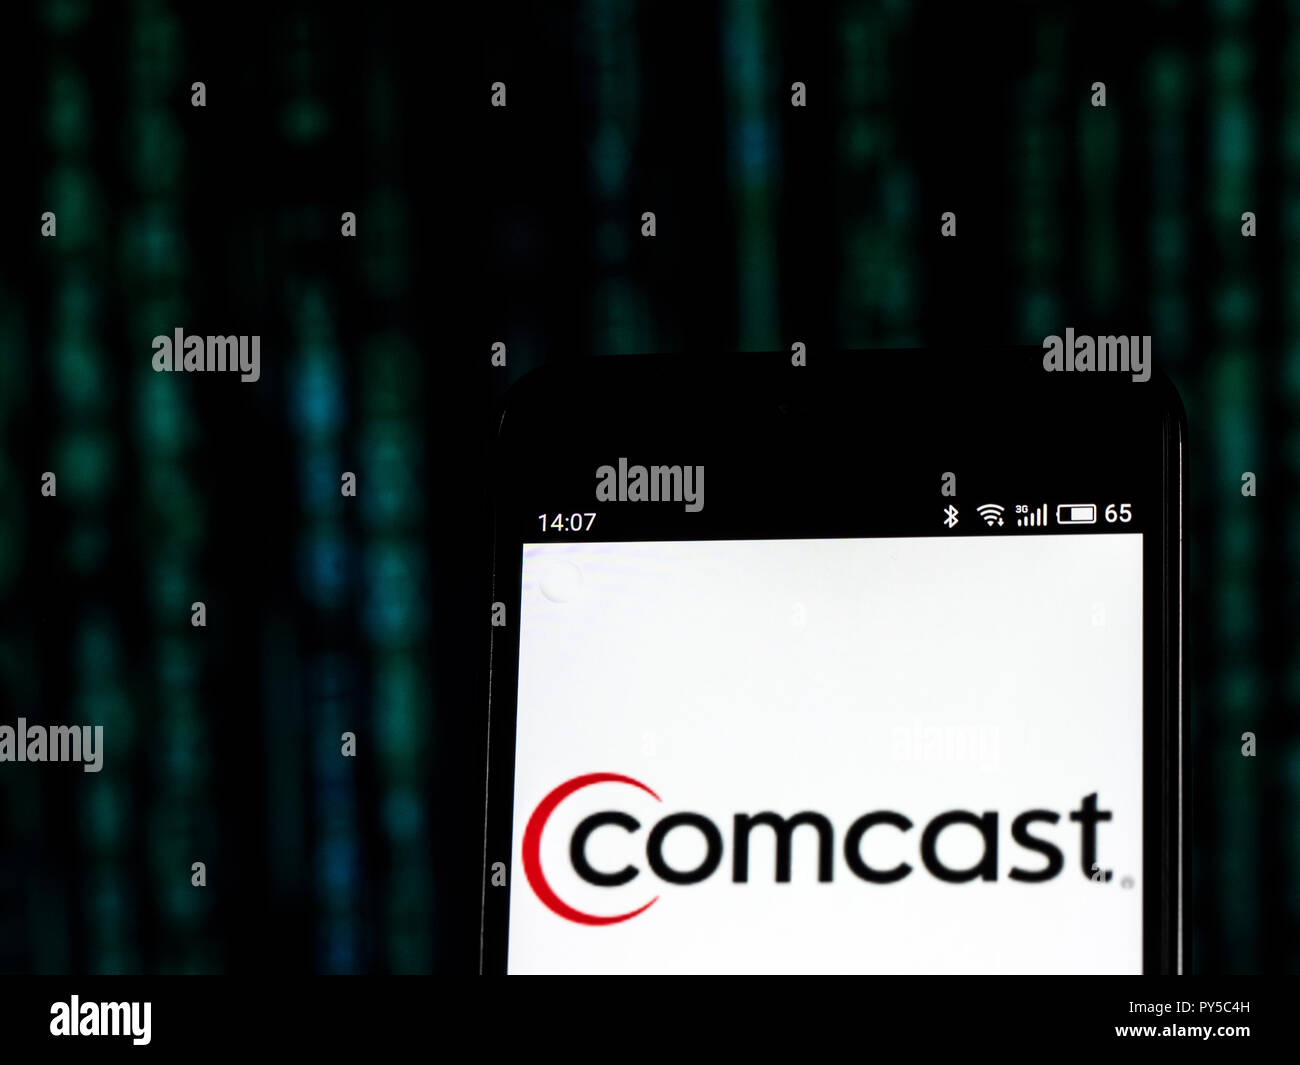 Comcast Telecommunications company logo seen displayed on smart phone. Comcast Corporation is an American global telecommunications conglomerate headquartered in Philadelphia, Pennsylvania. Stock Photo